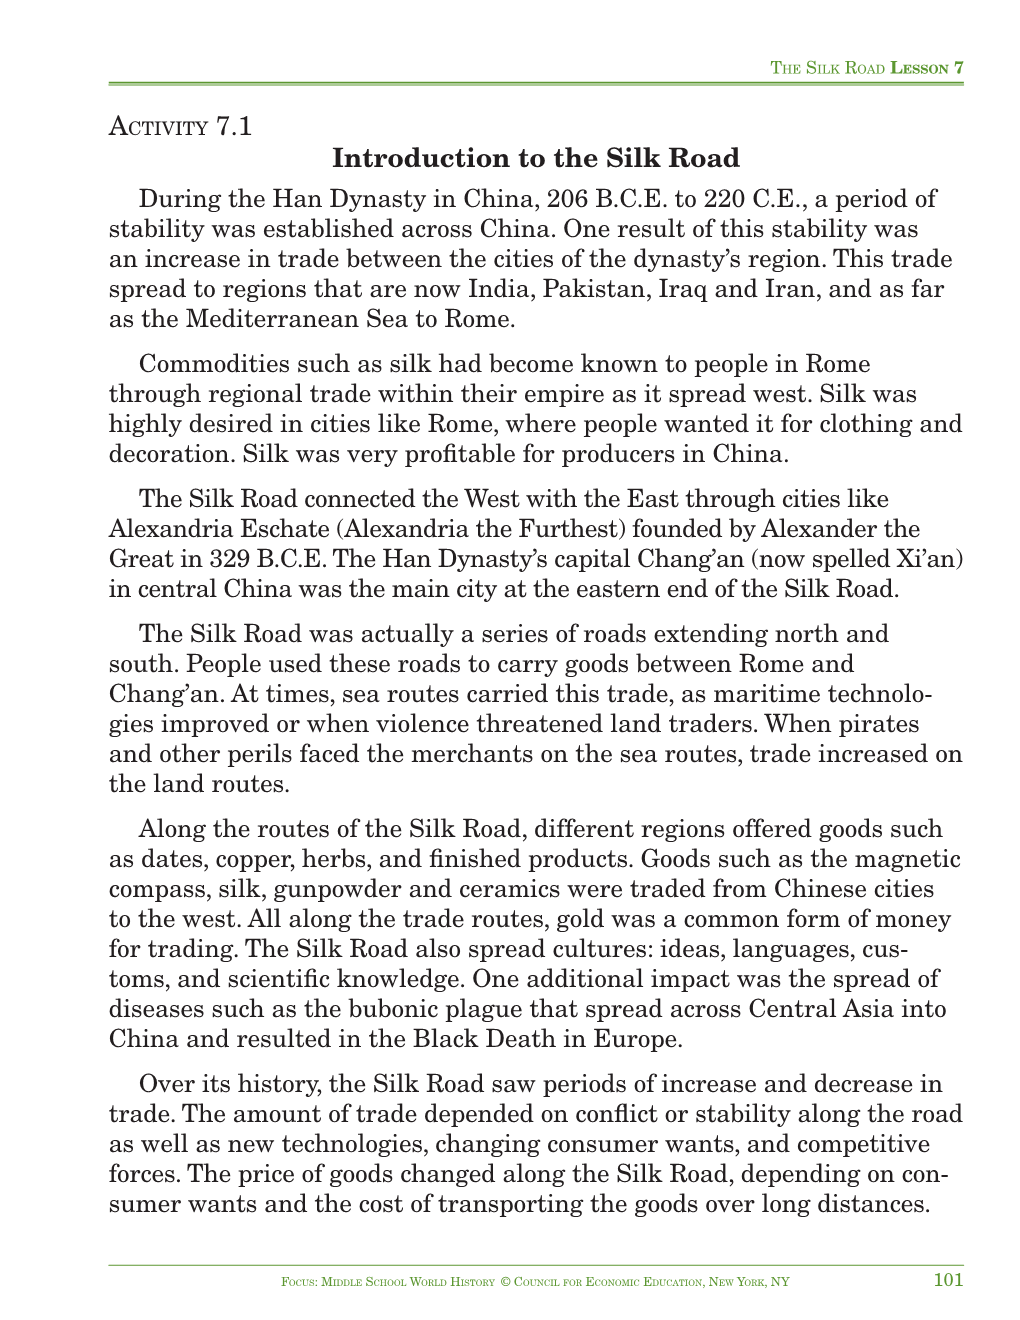 Introduction to the Silk Road During the Han Dynasty in China, 206 B.C.E